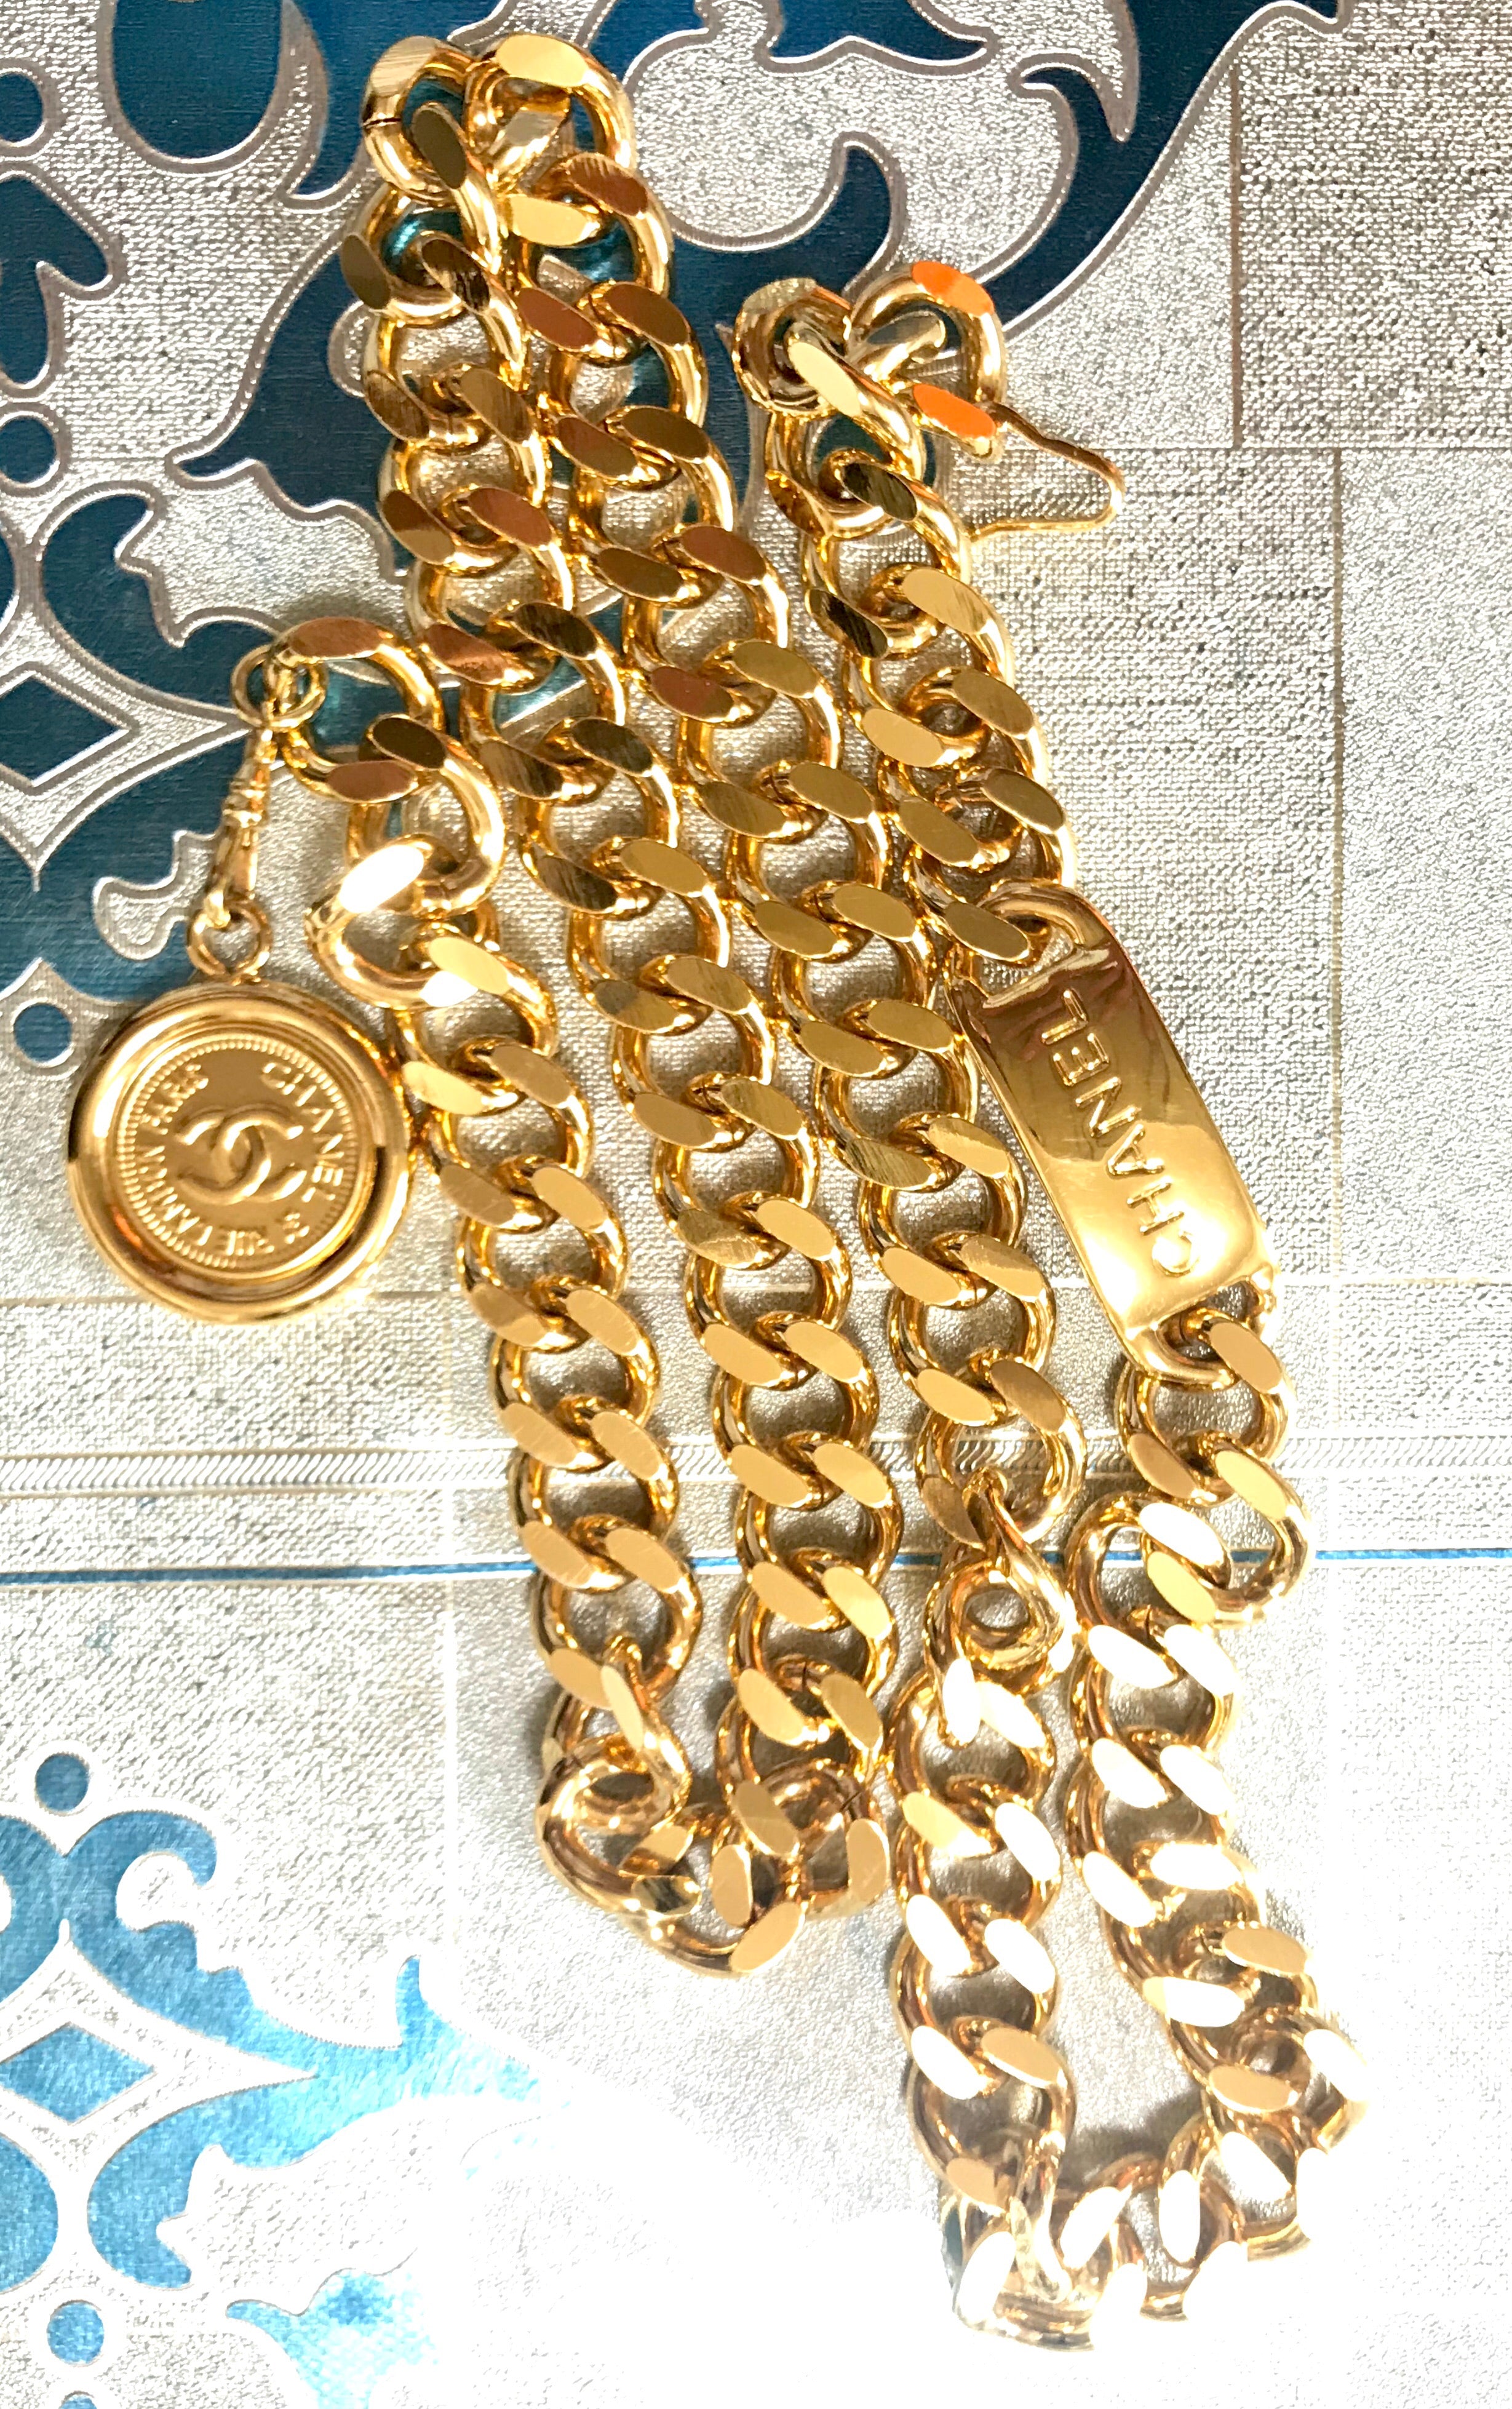 MINT. Vintage CHANEL golden thick chain belt with a CC charm and